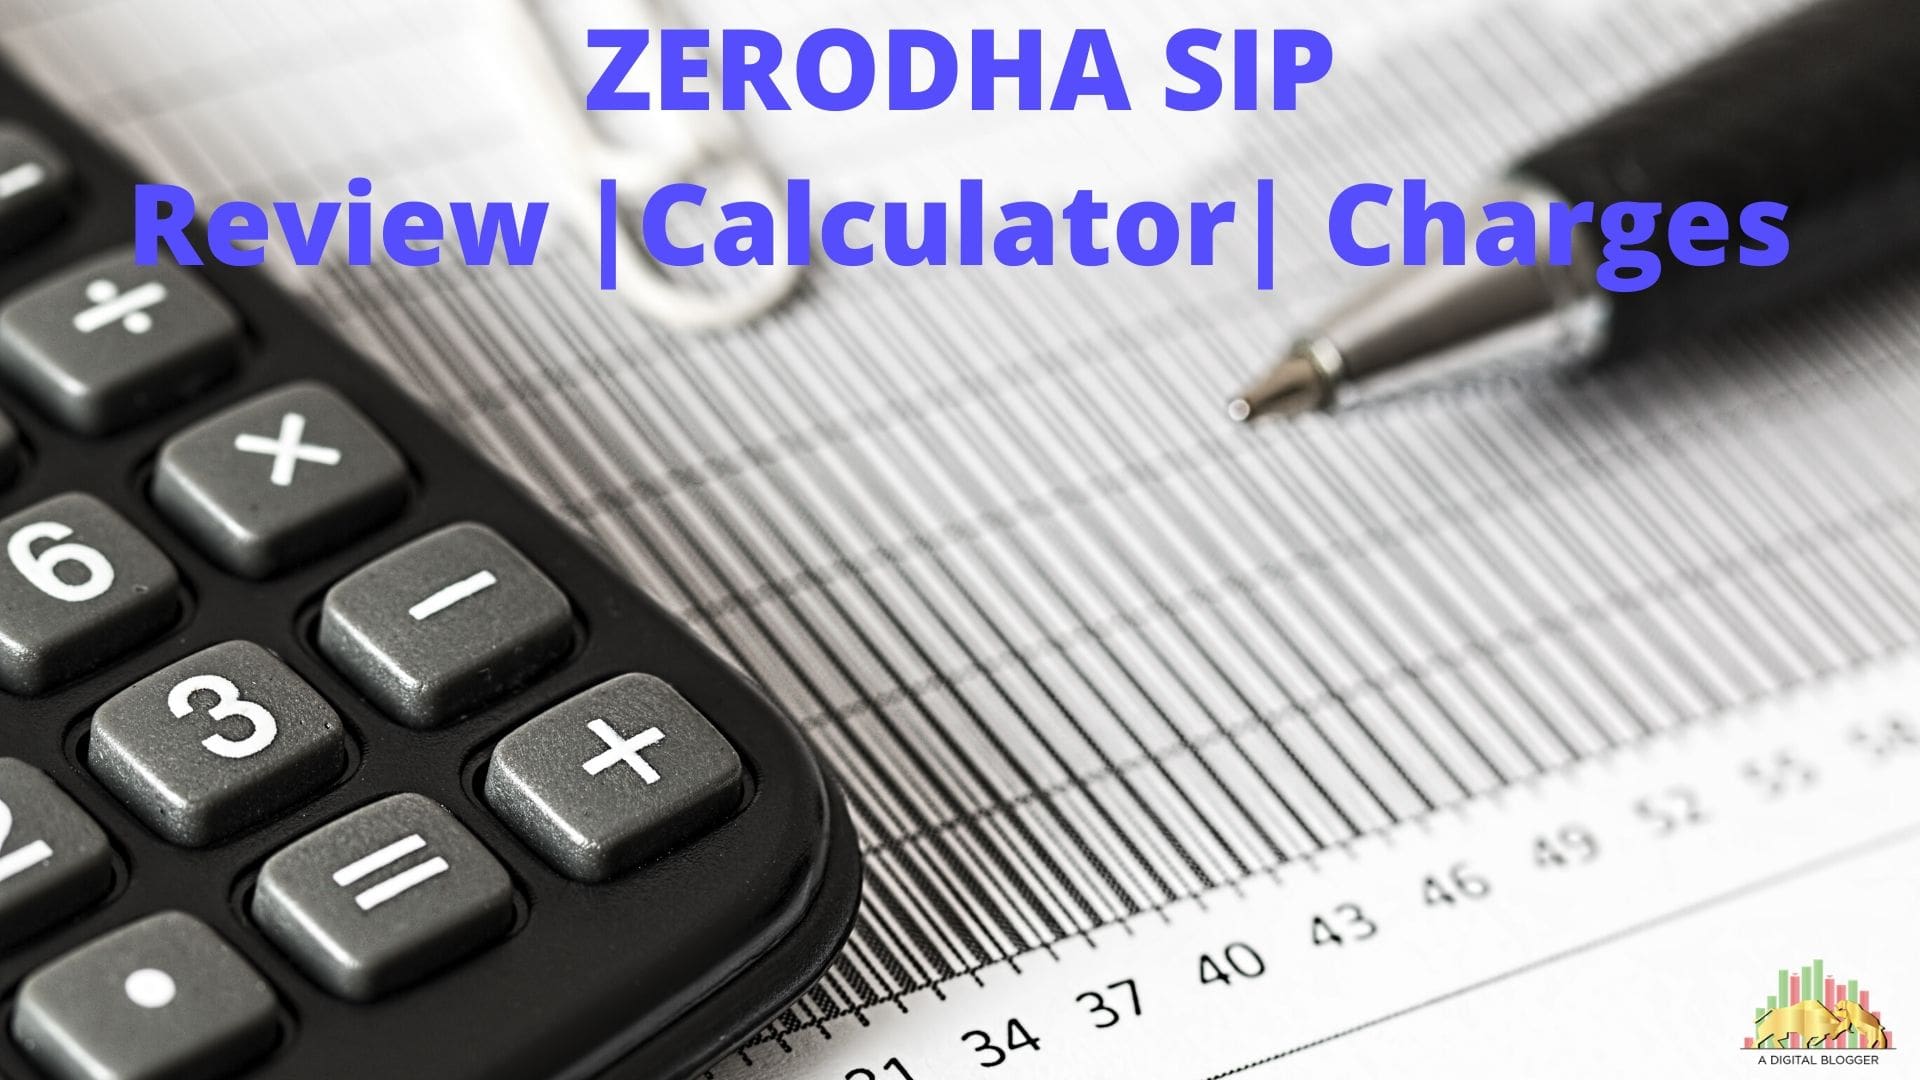 Zerodha SIP | Review, Calculator, Charges, Mutual Fund ...